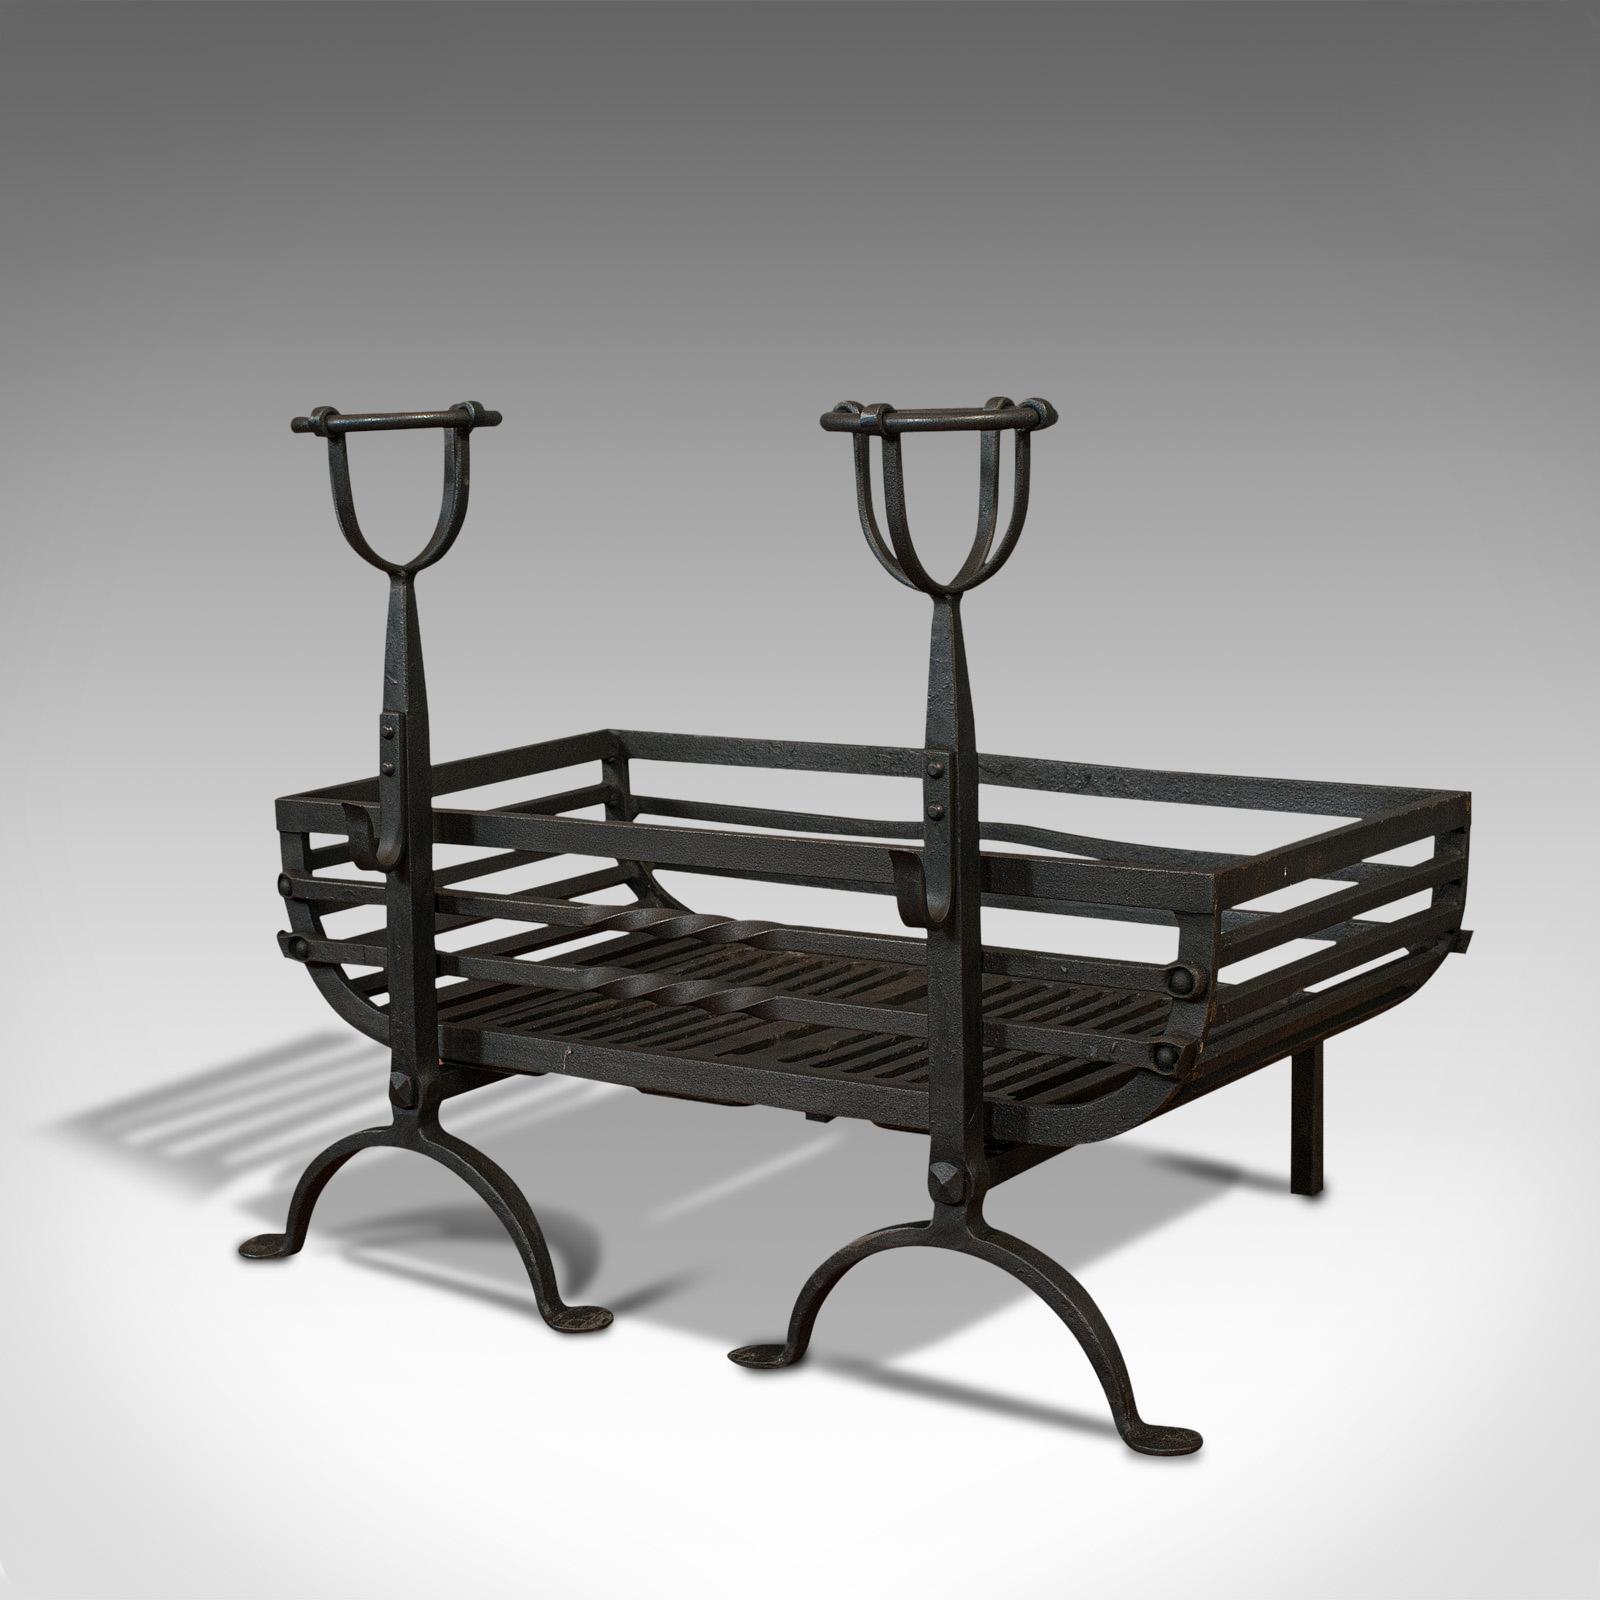 British Antique Fire Basket, Pair of Andirons, English, Iron, Fireside, Victorian, 1900